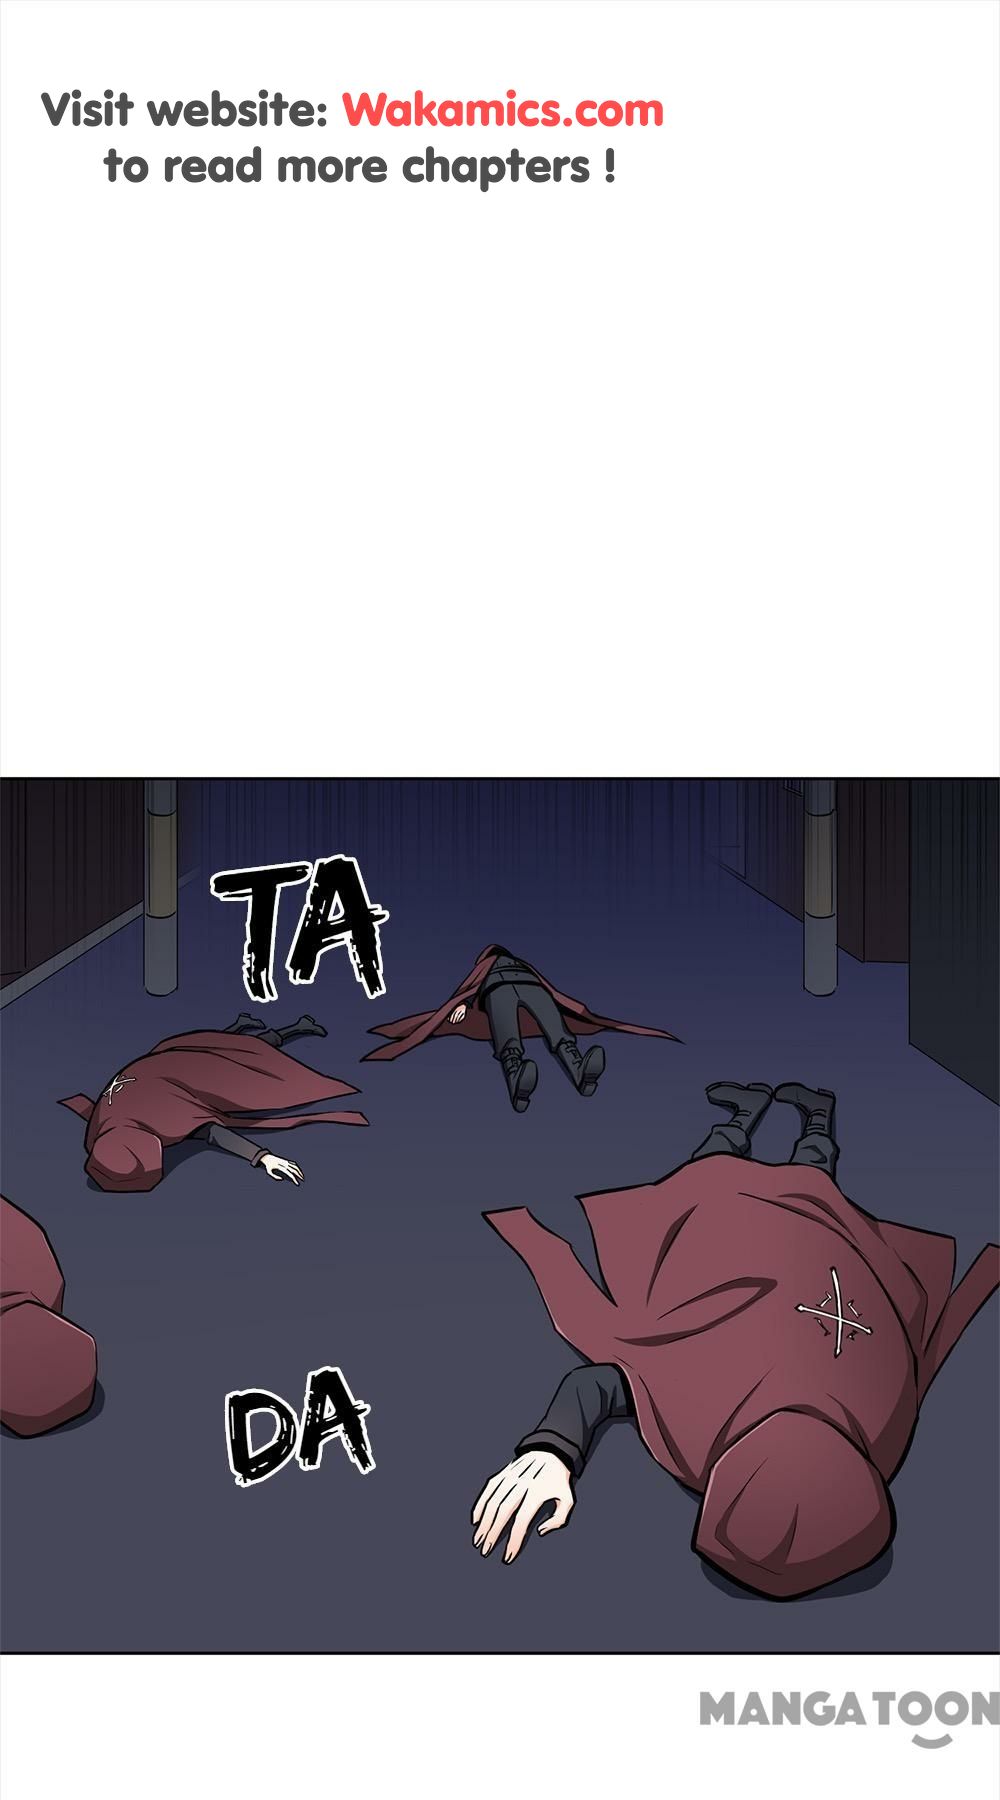 Blood Type Love - Page 1